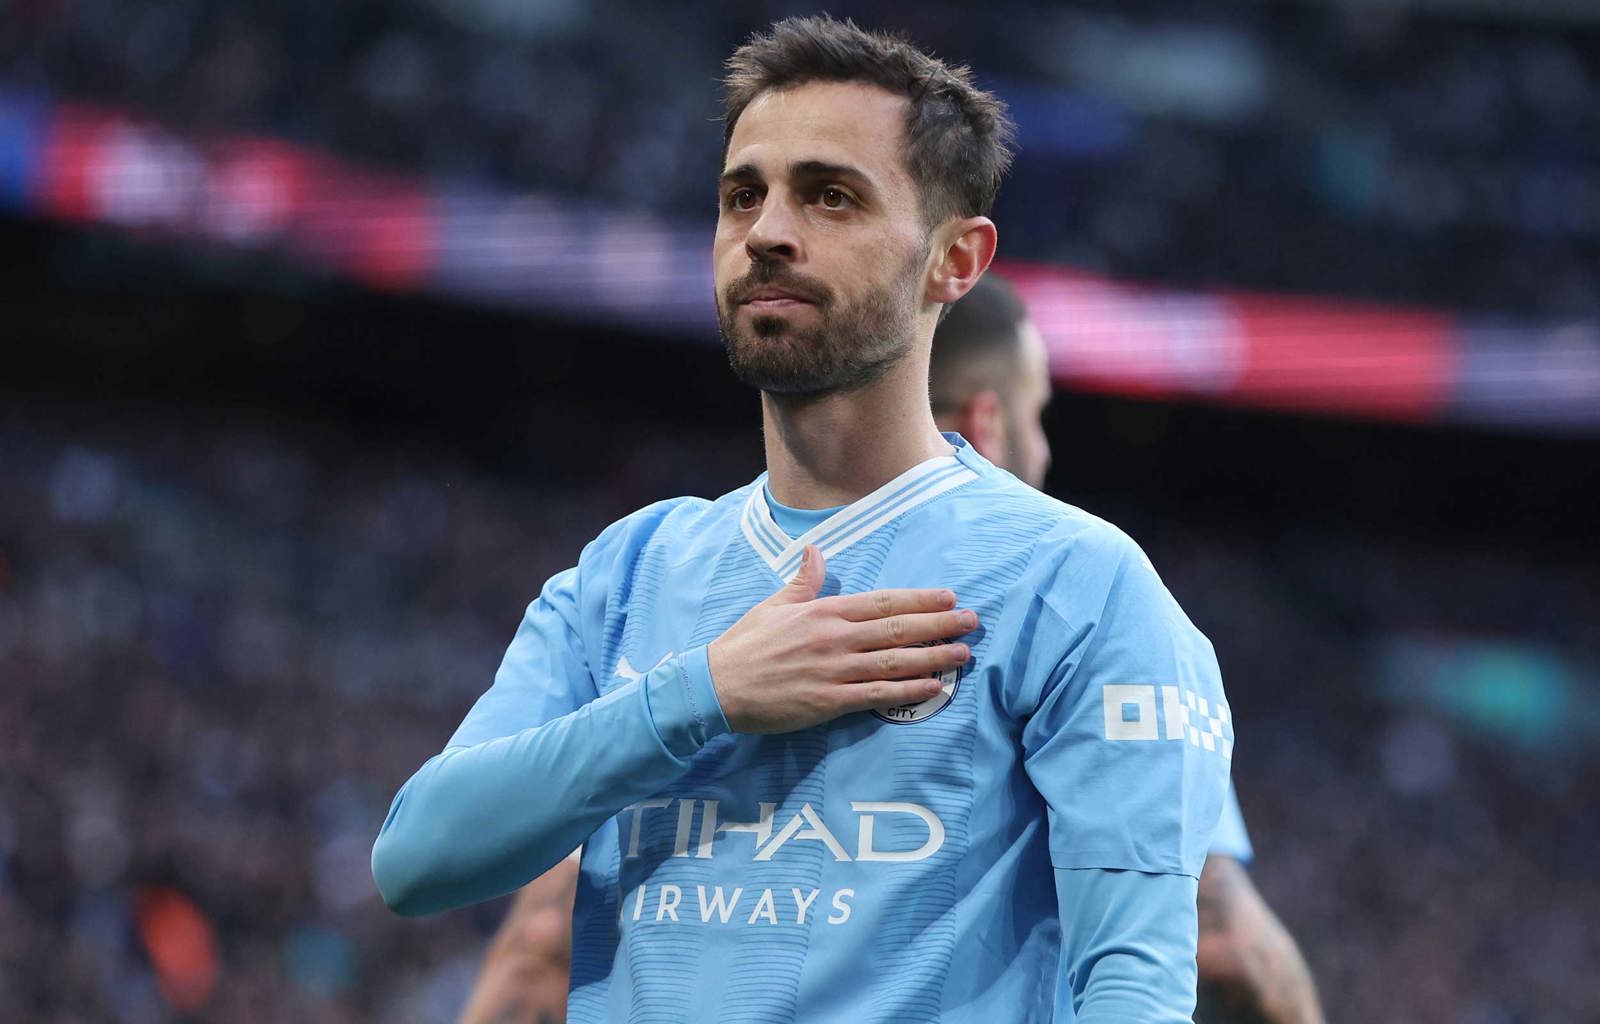 It's too much" – Bernardo Silva speaks out on workload - FIFPRO World  Players' Union